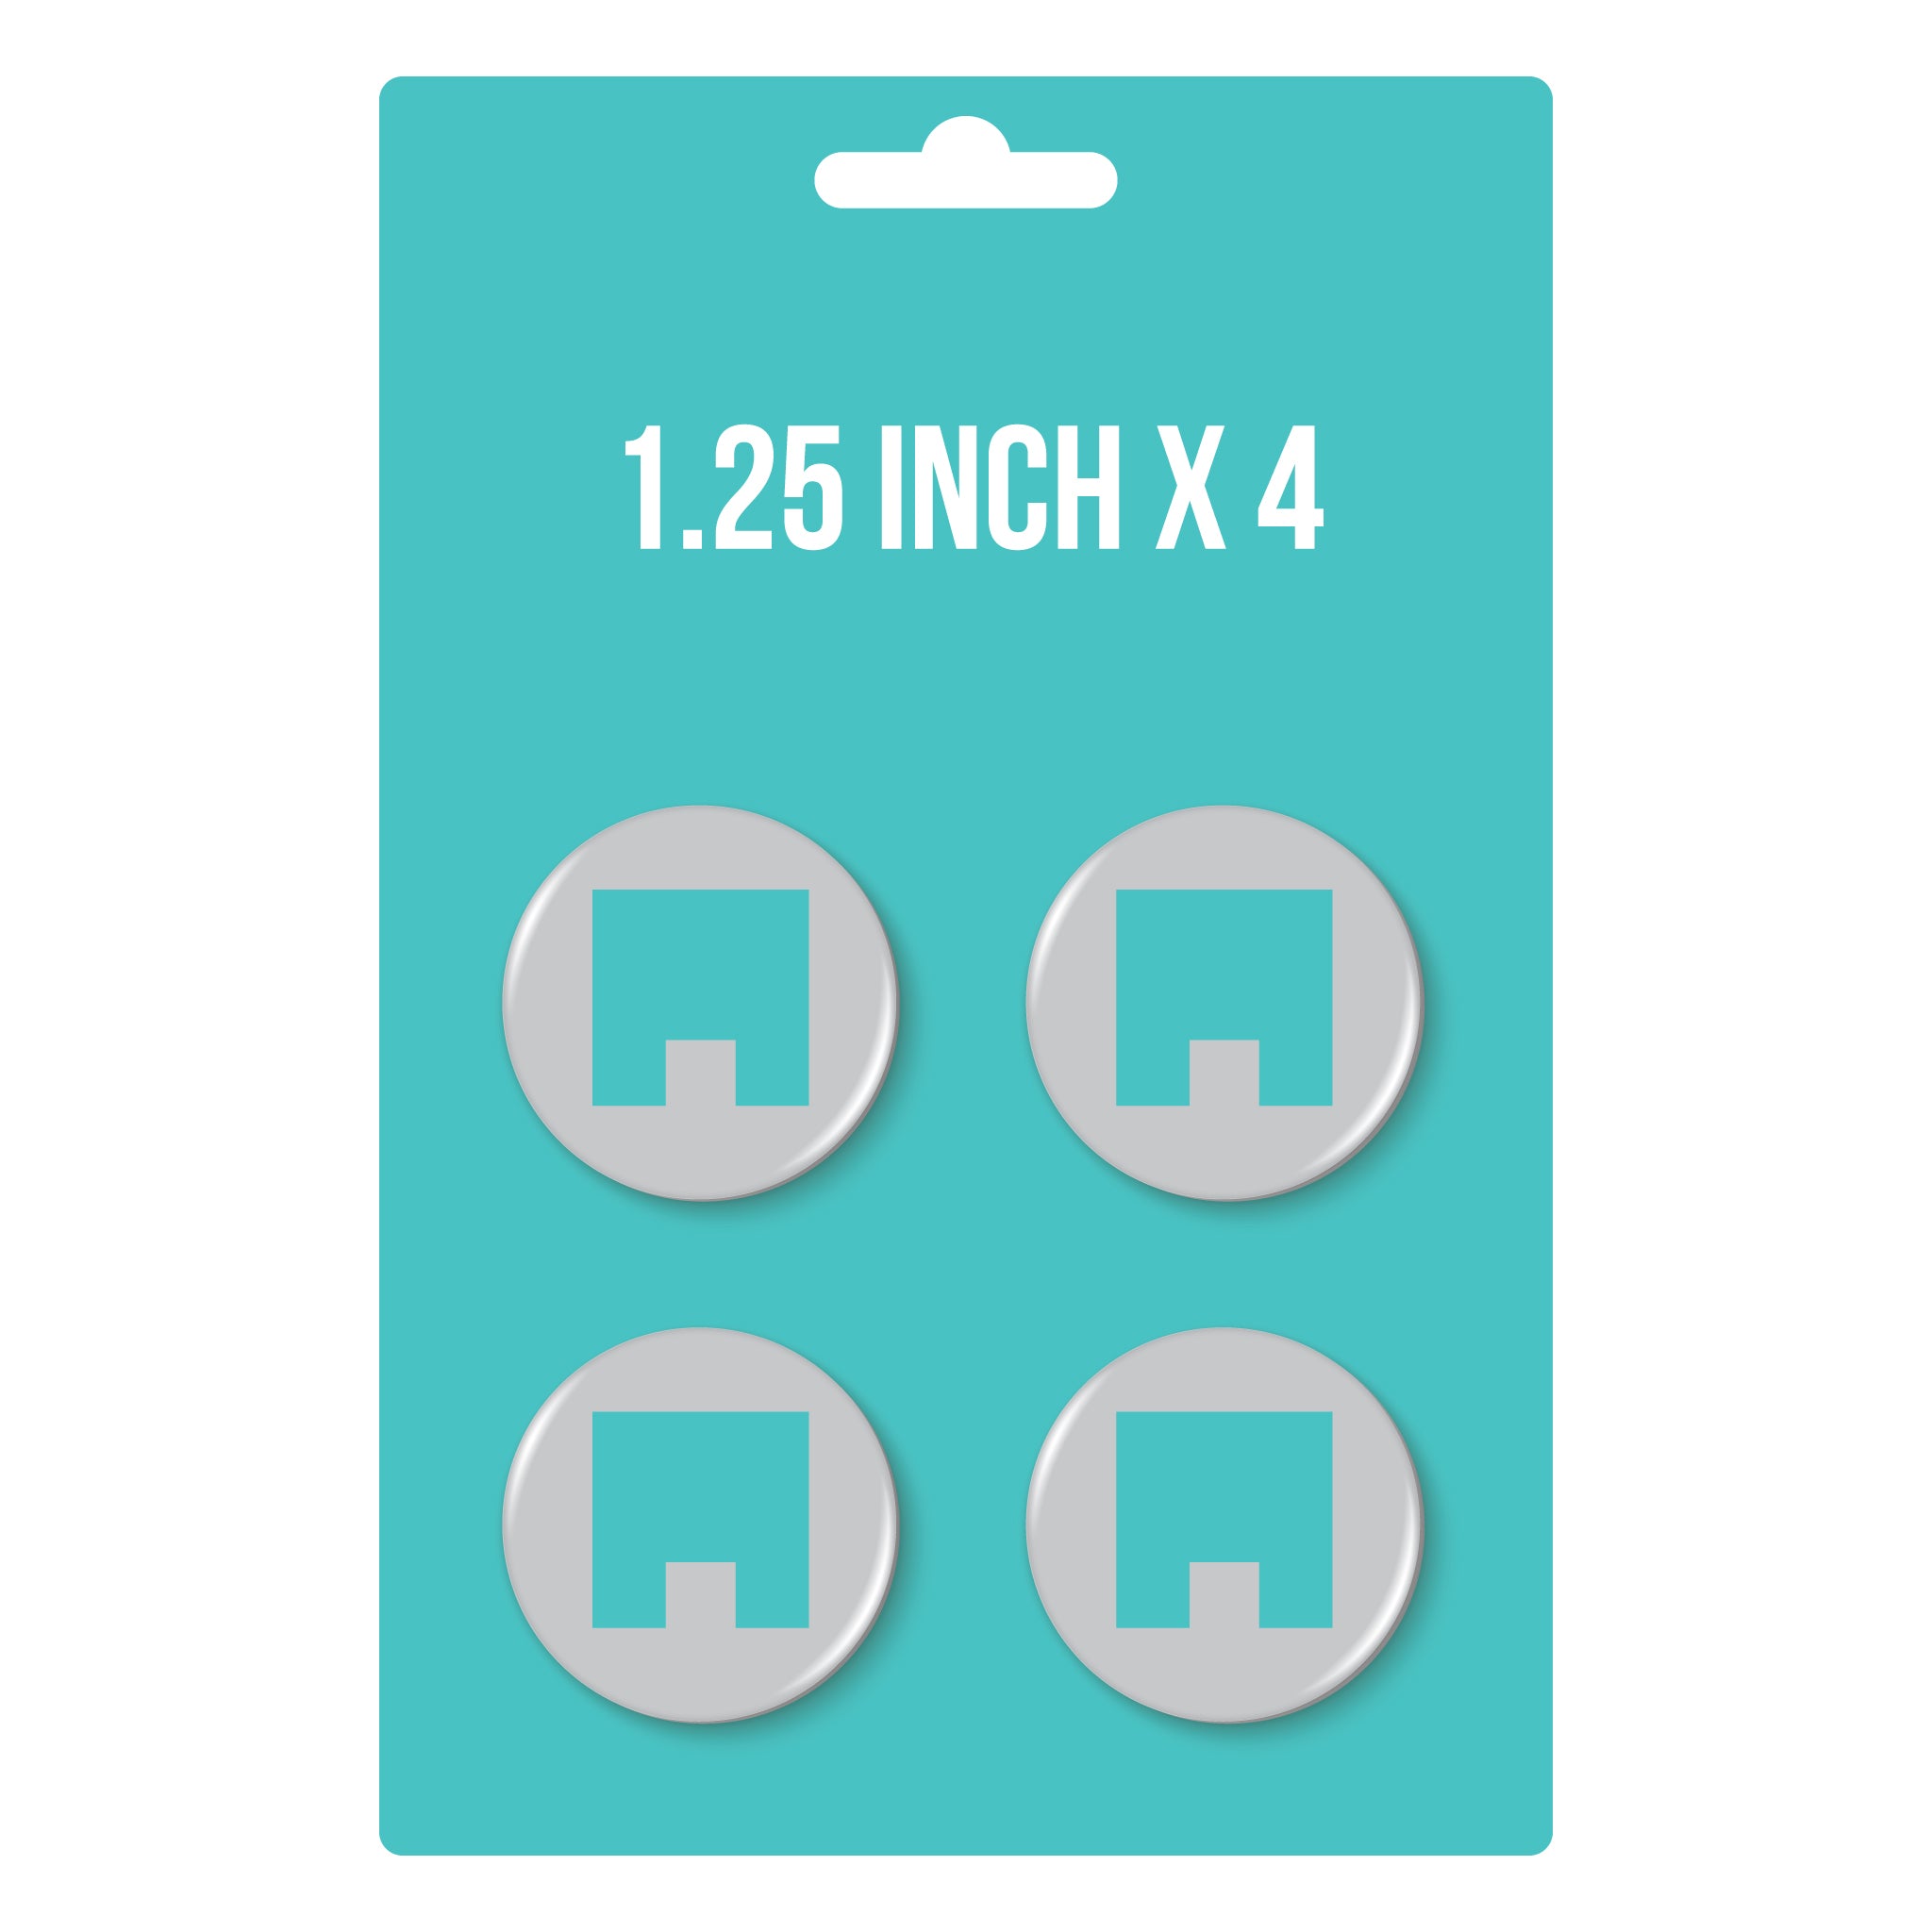 1.25" x 4 Button Pack